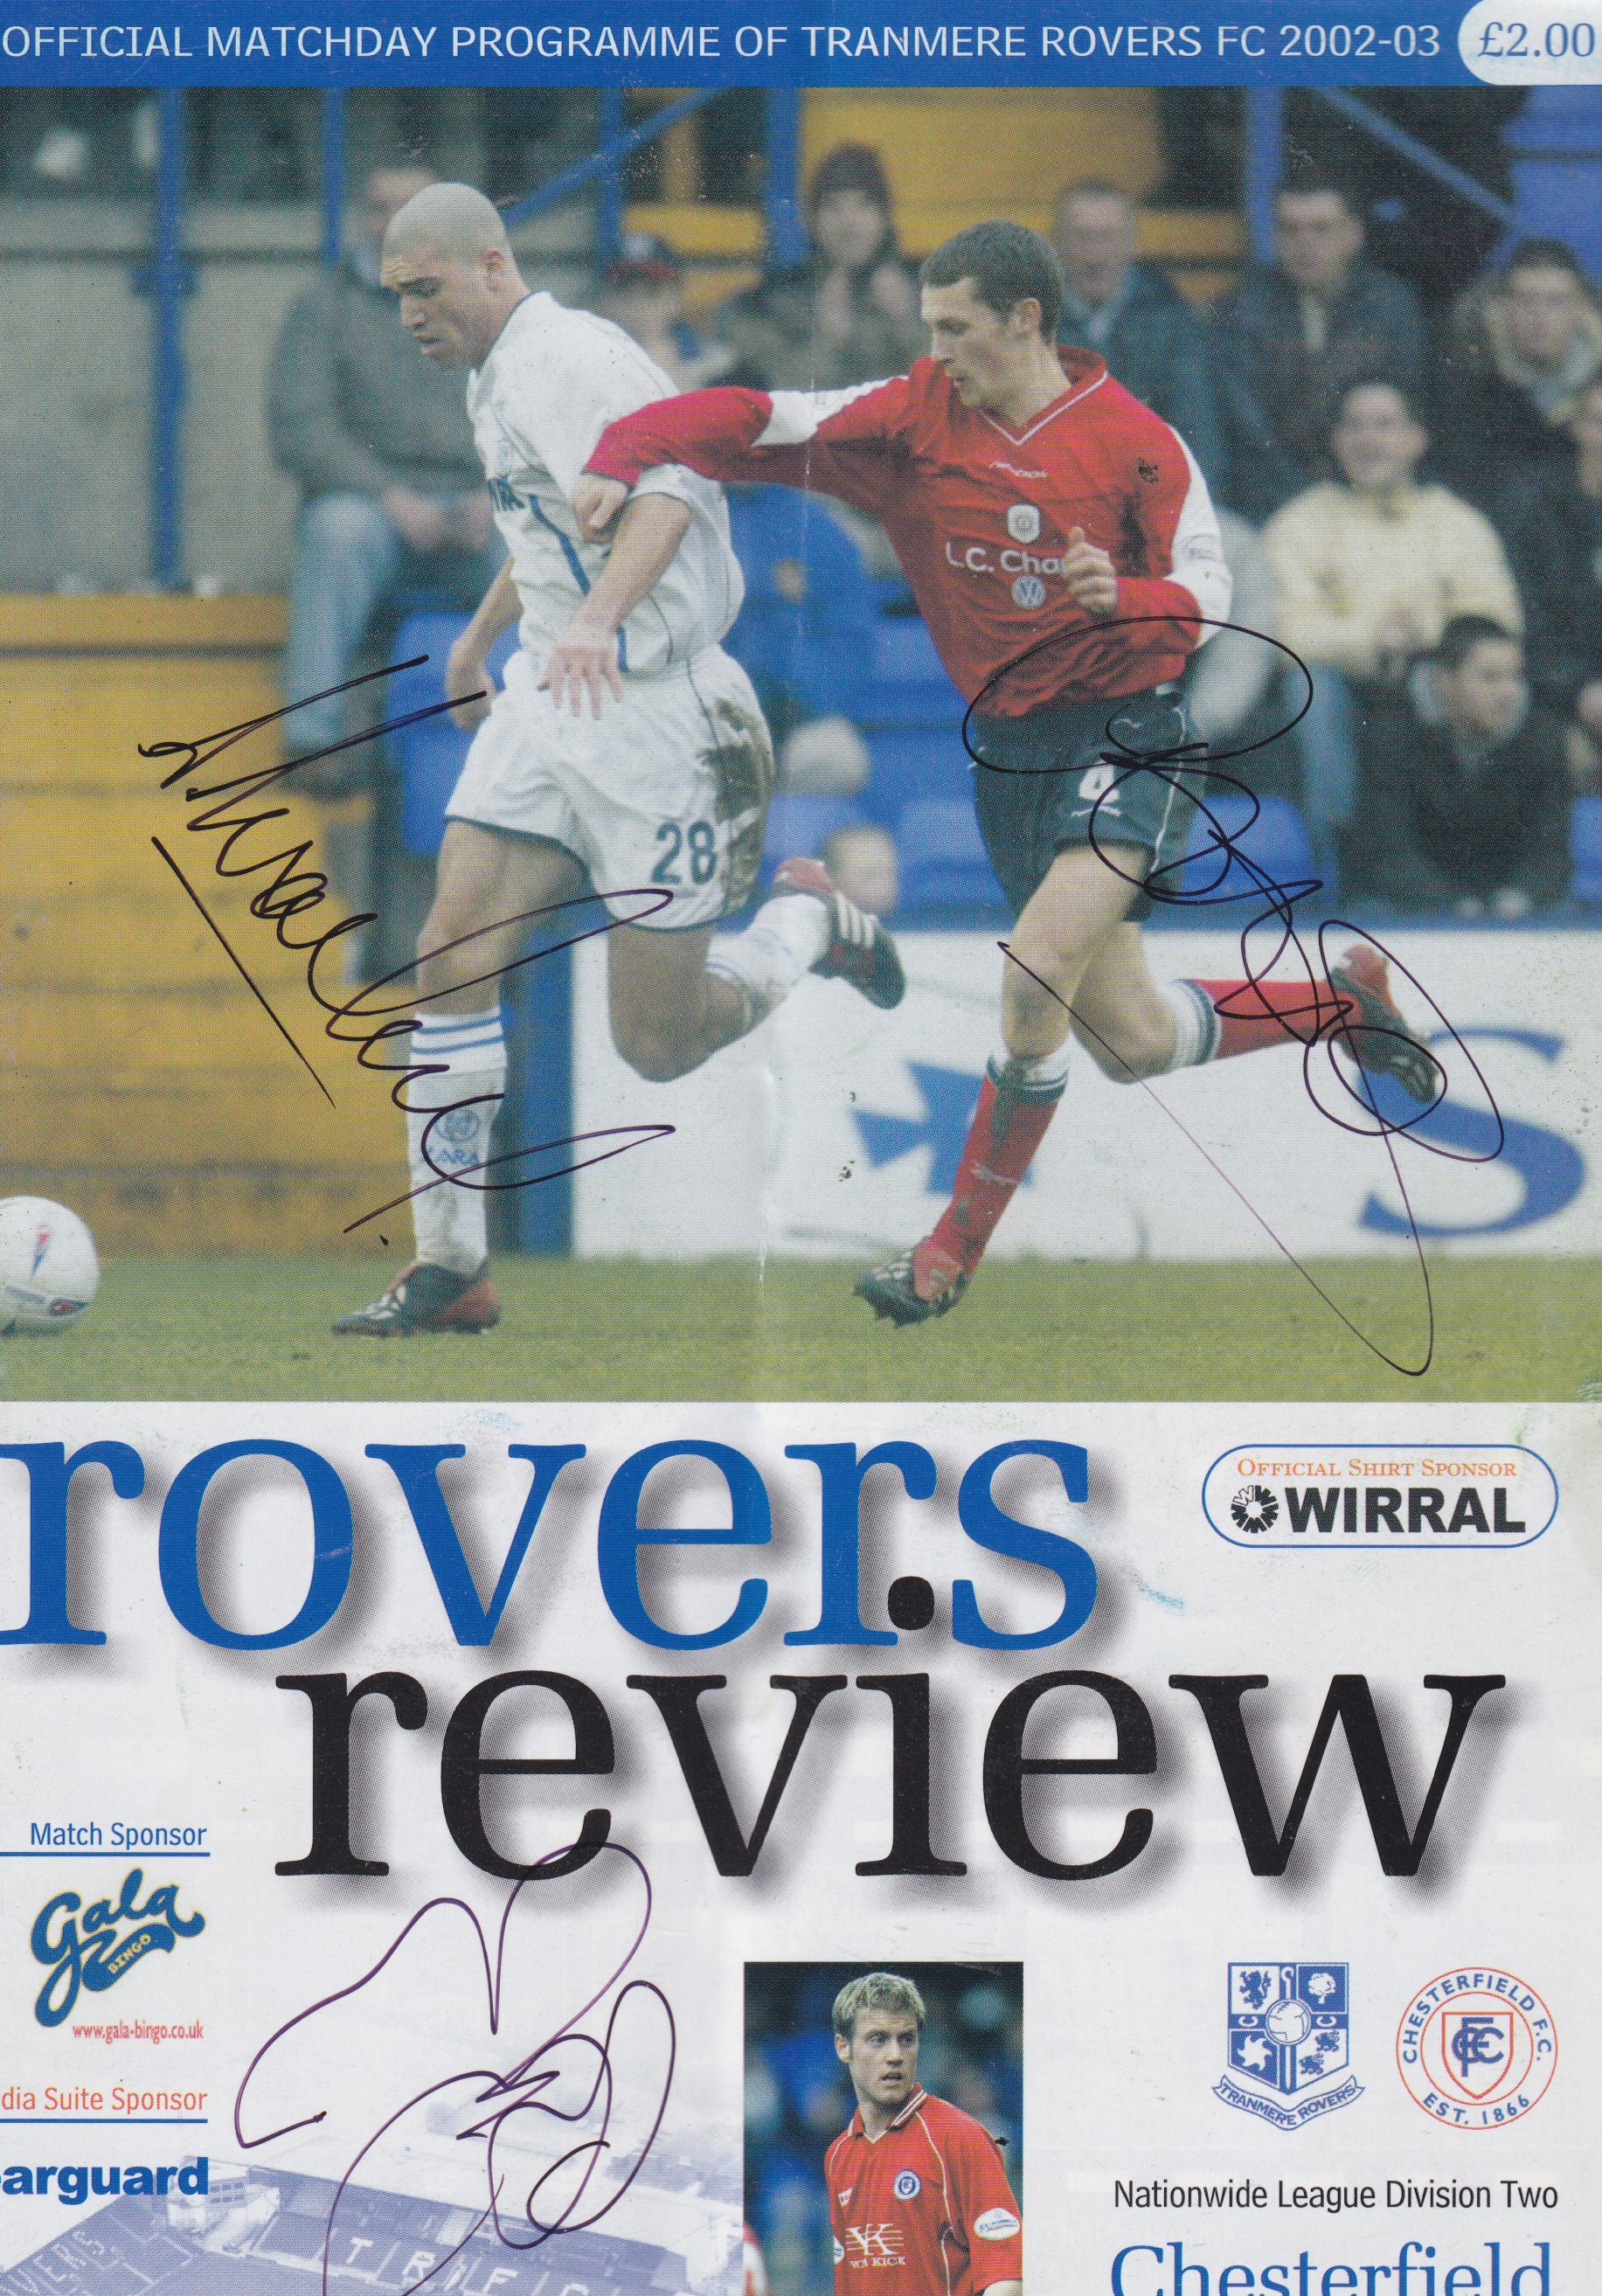 Match Programme For {home}} 2-1 Chesterfield, League, 2003-03-29